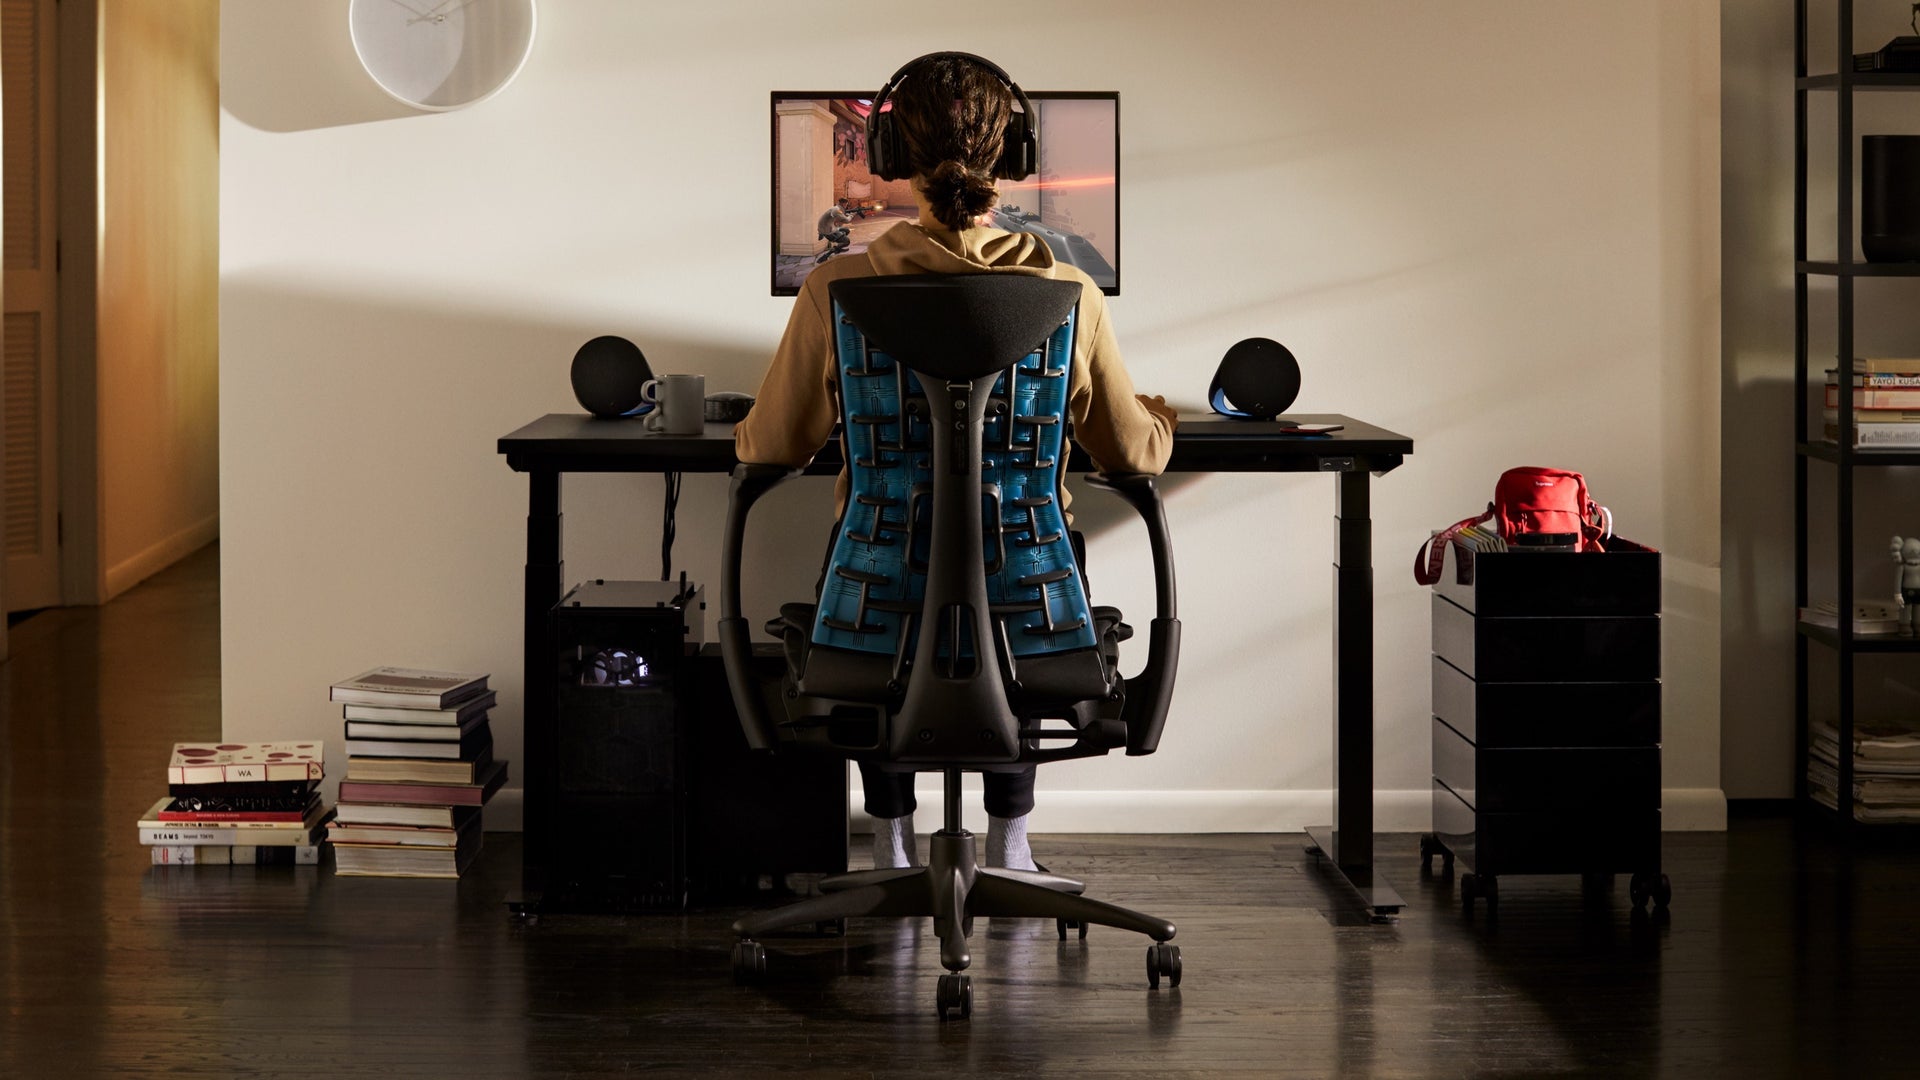 A person sits in the Embody Gaming Chair and looks at a monitor attached to the Ollin Monitor Arm, which sits on top of the gaming desk in a residential setting.